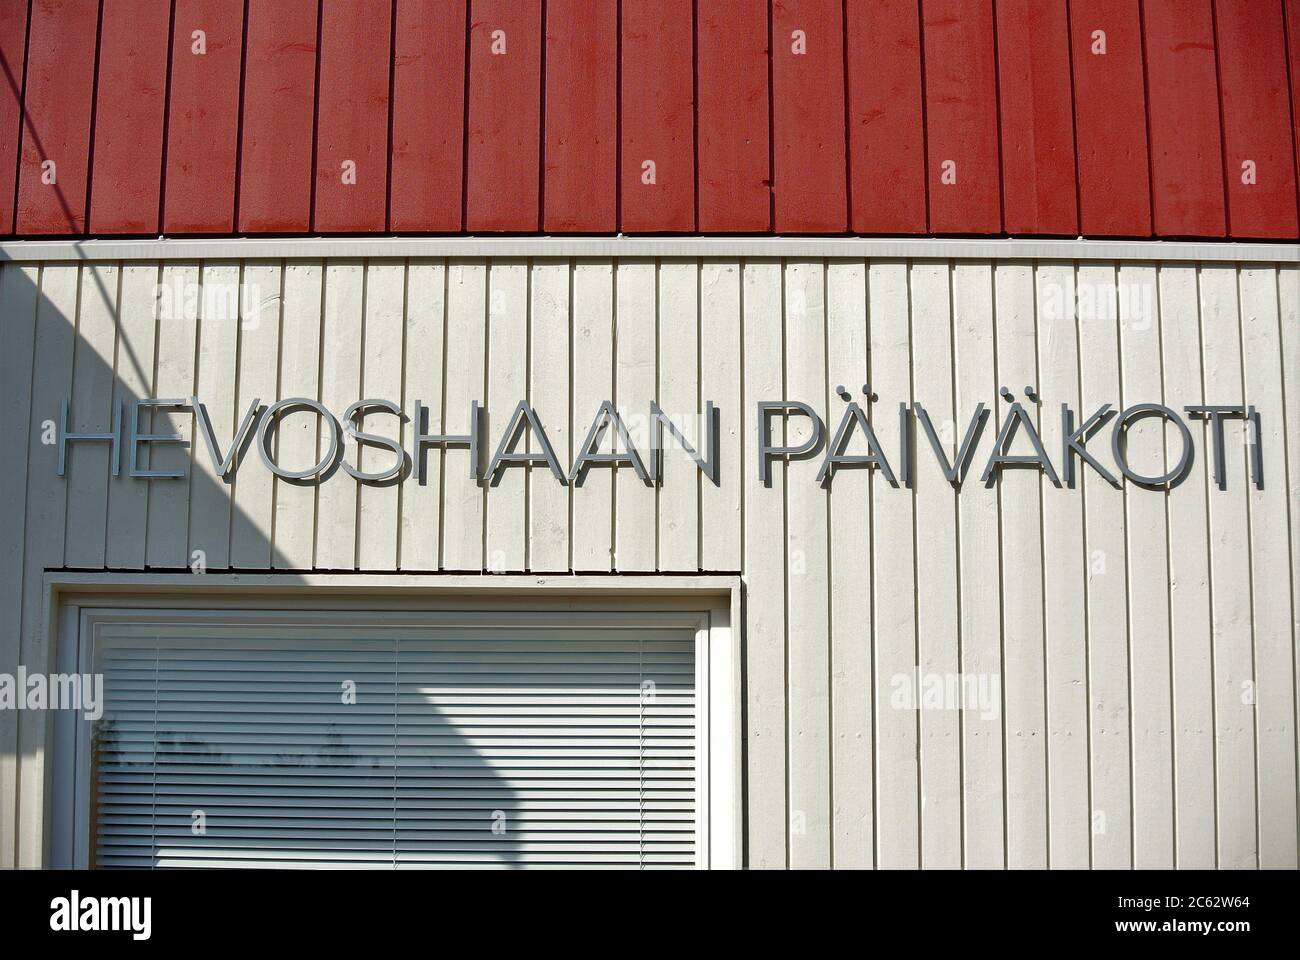 Helsinki and Vantaa in Pictures Stock Photo